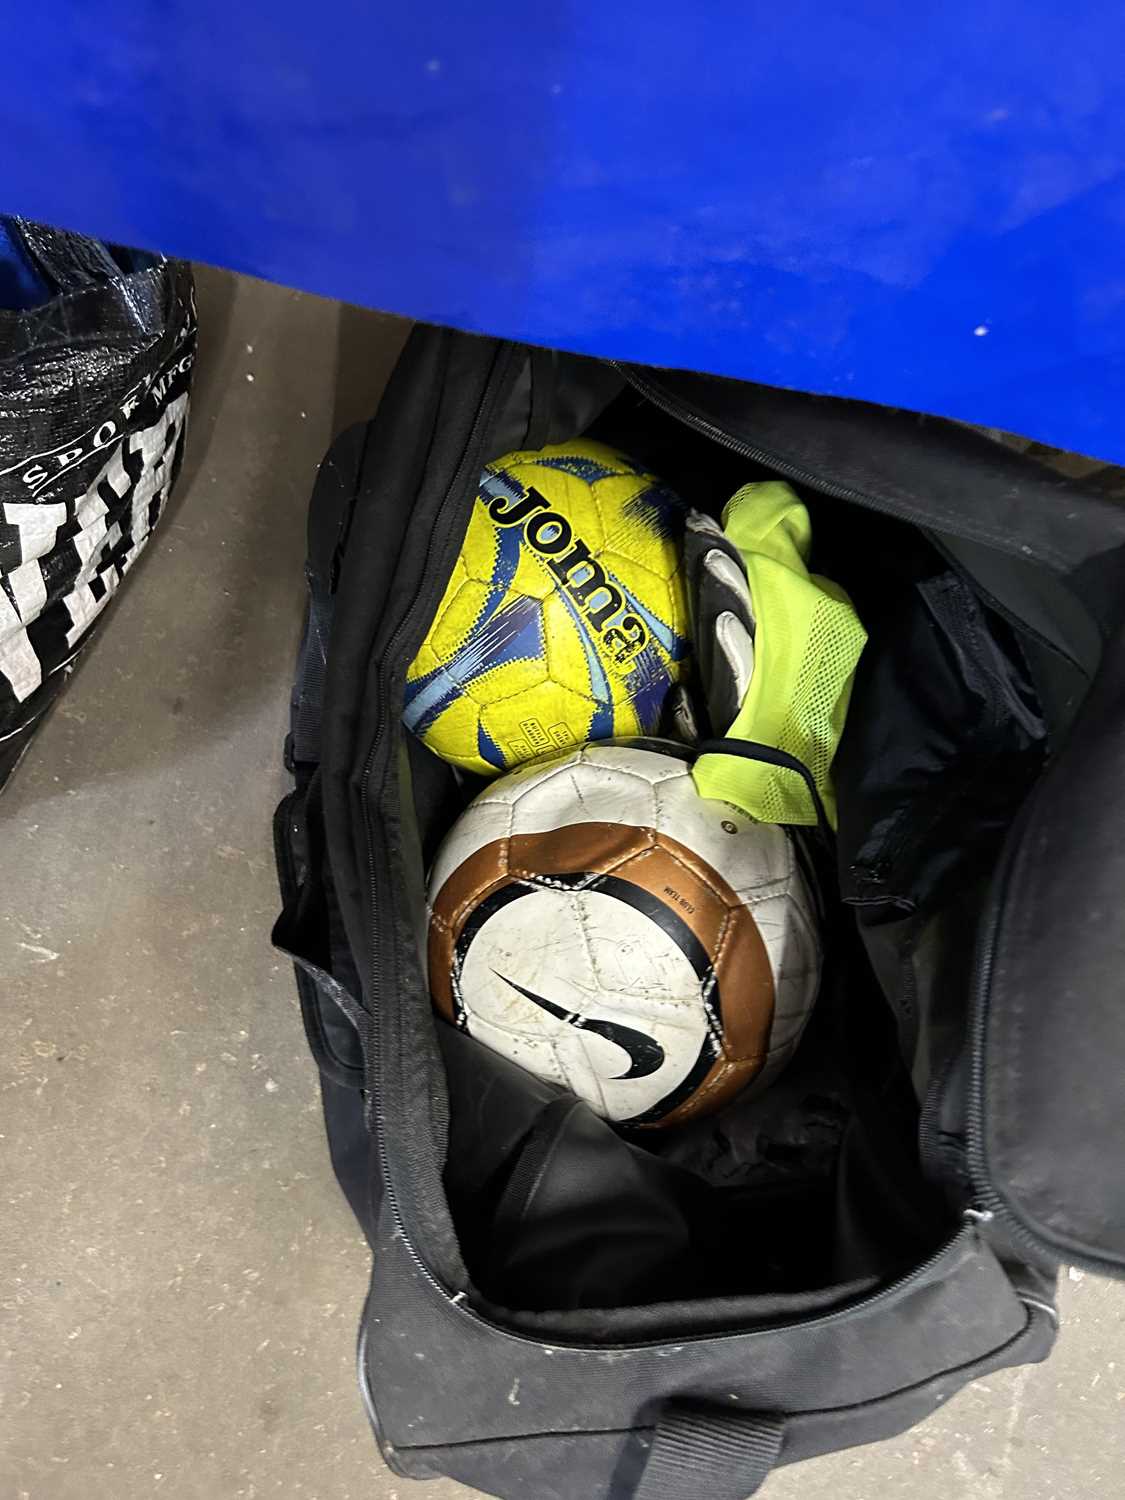 Large holdall together with footballs, goal keeping gloves etc